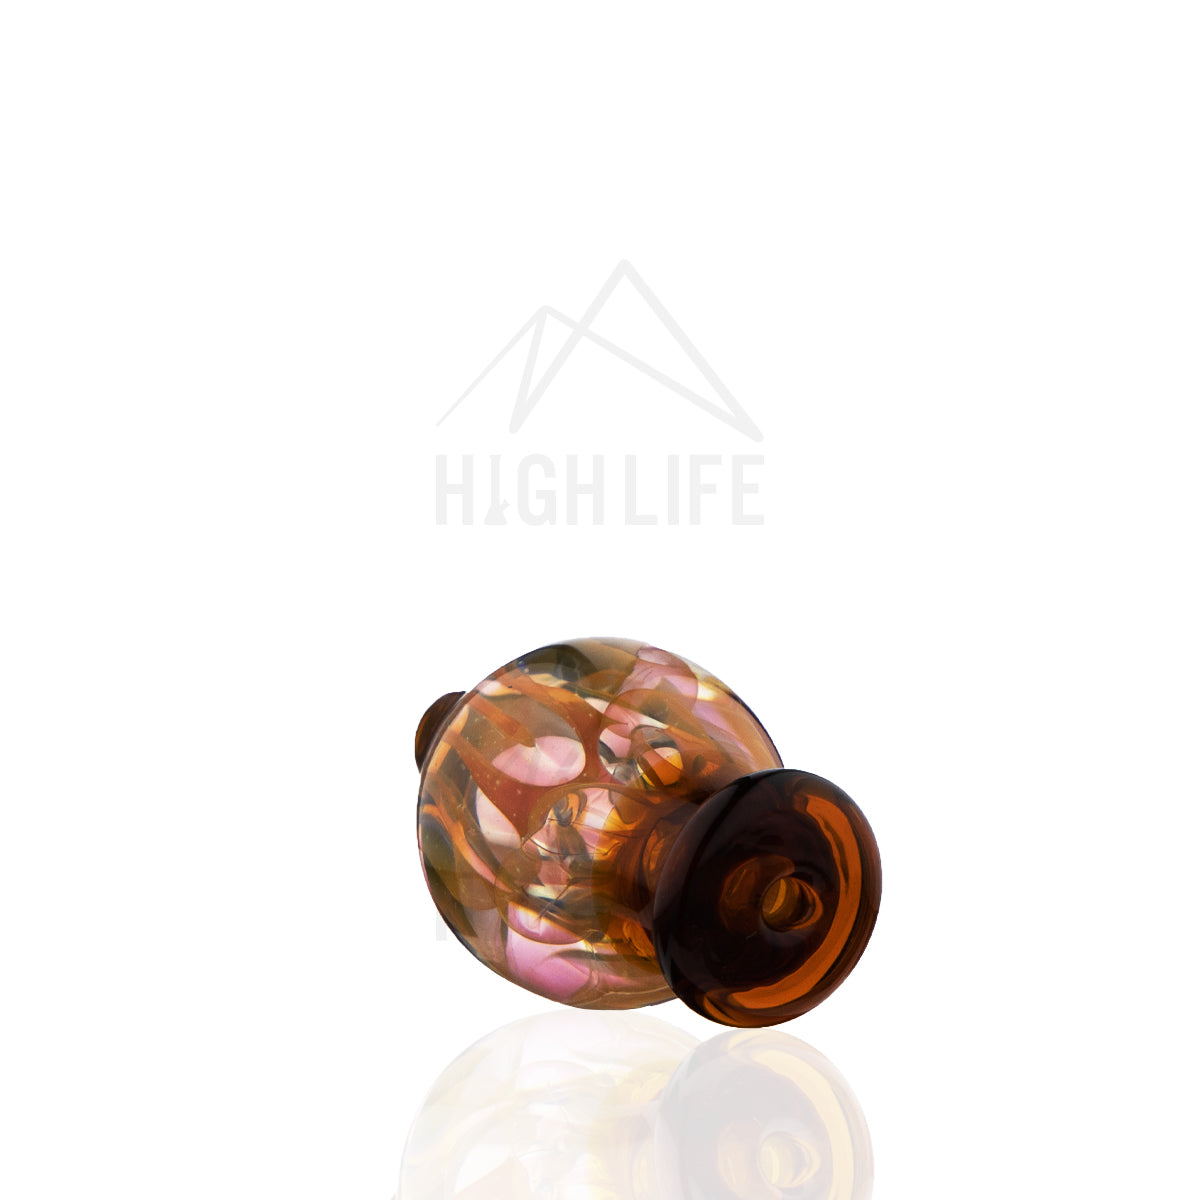 Glass Snaked Carb Cap